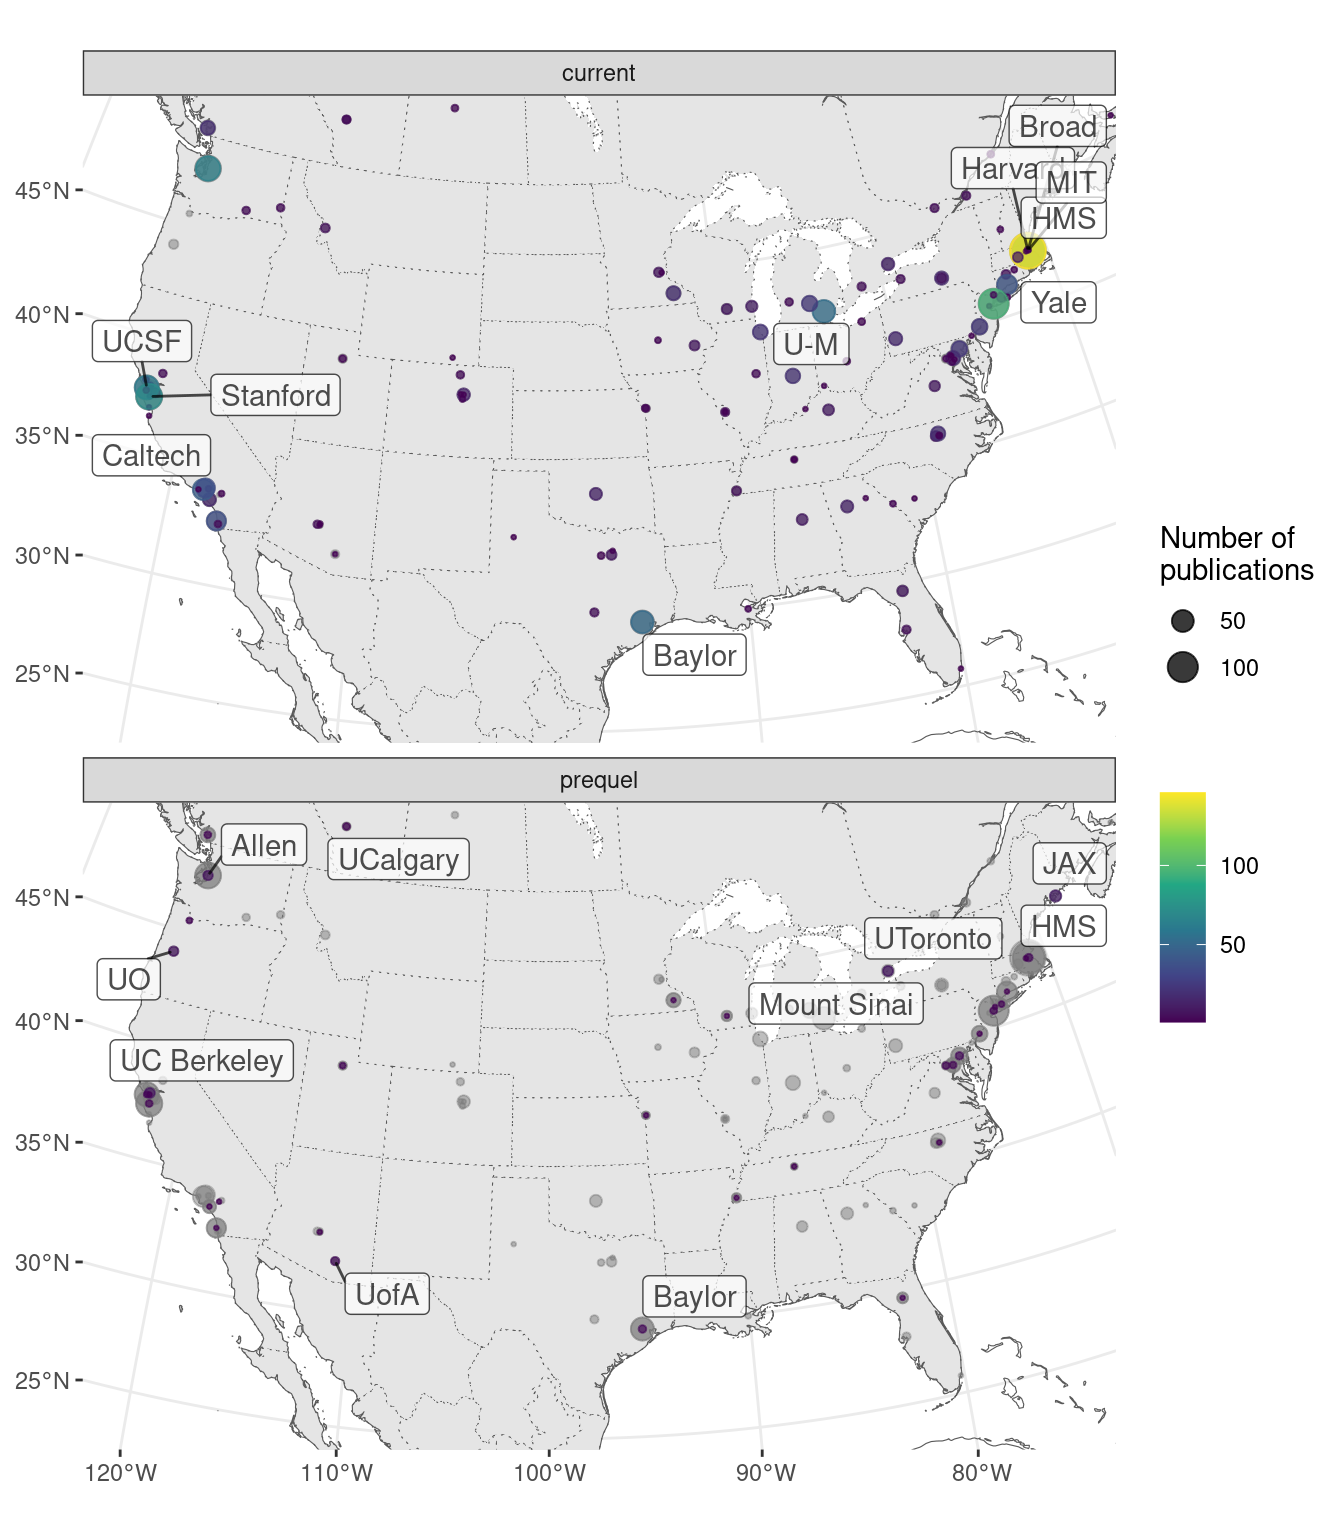 Map of institutions around continental US. Area of the point is proportional to the number of publications from that city. Gray points are sum of both prequel and current eras for each city. Top 10 institutions in each era are labeled.